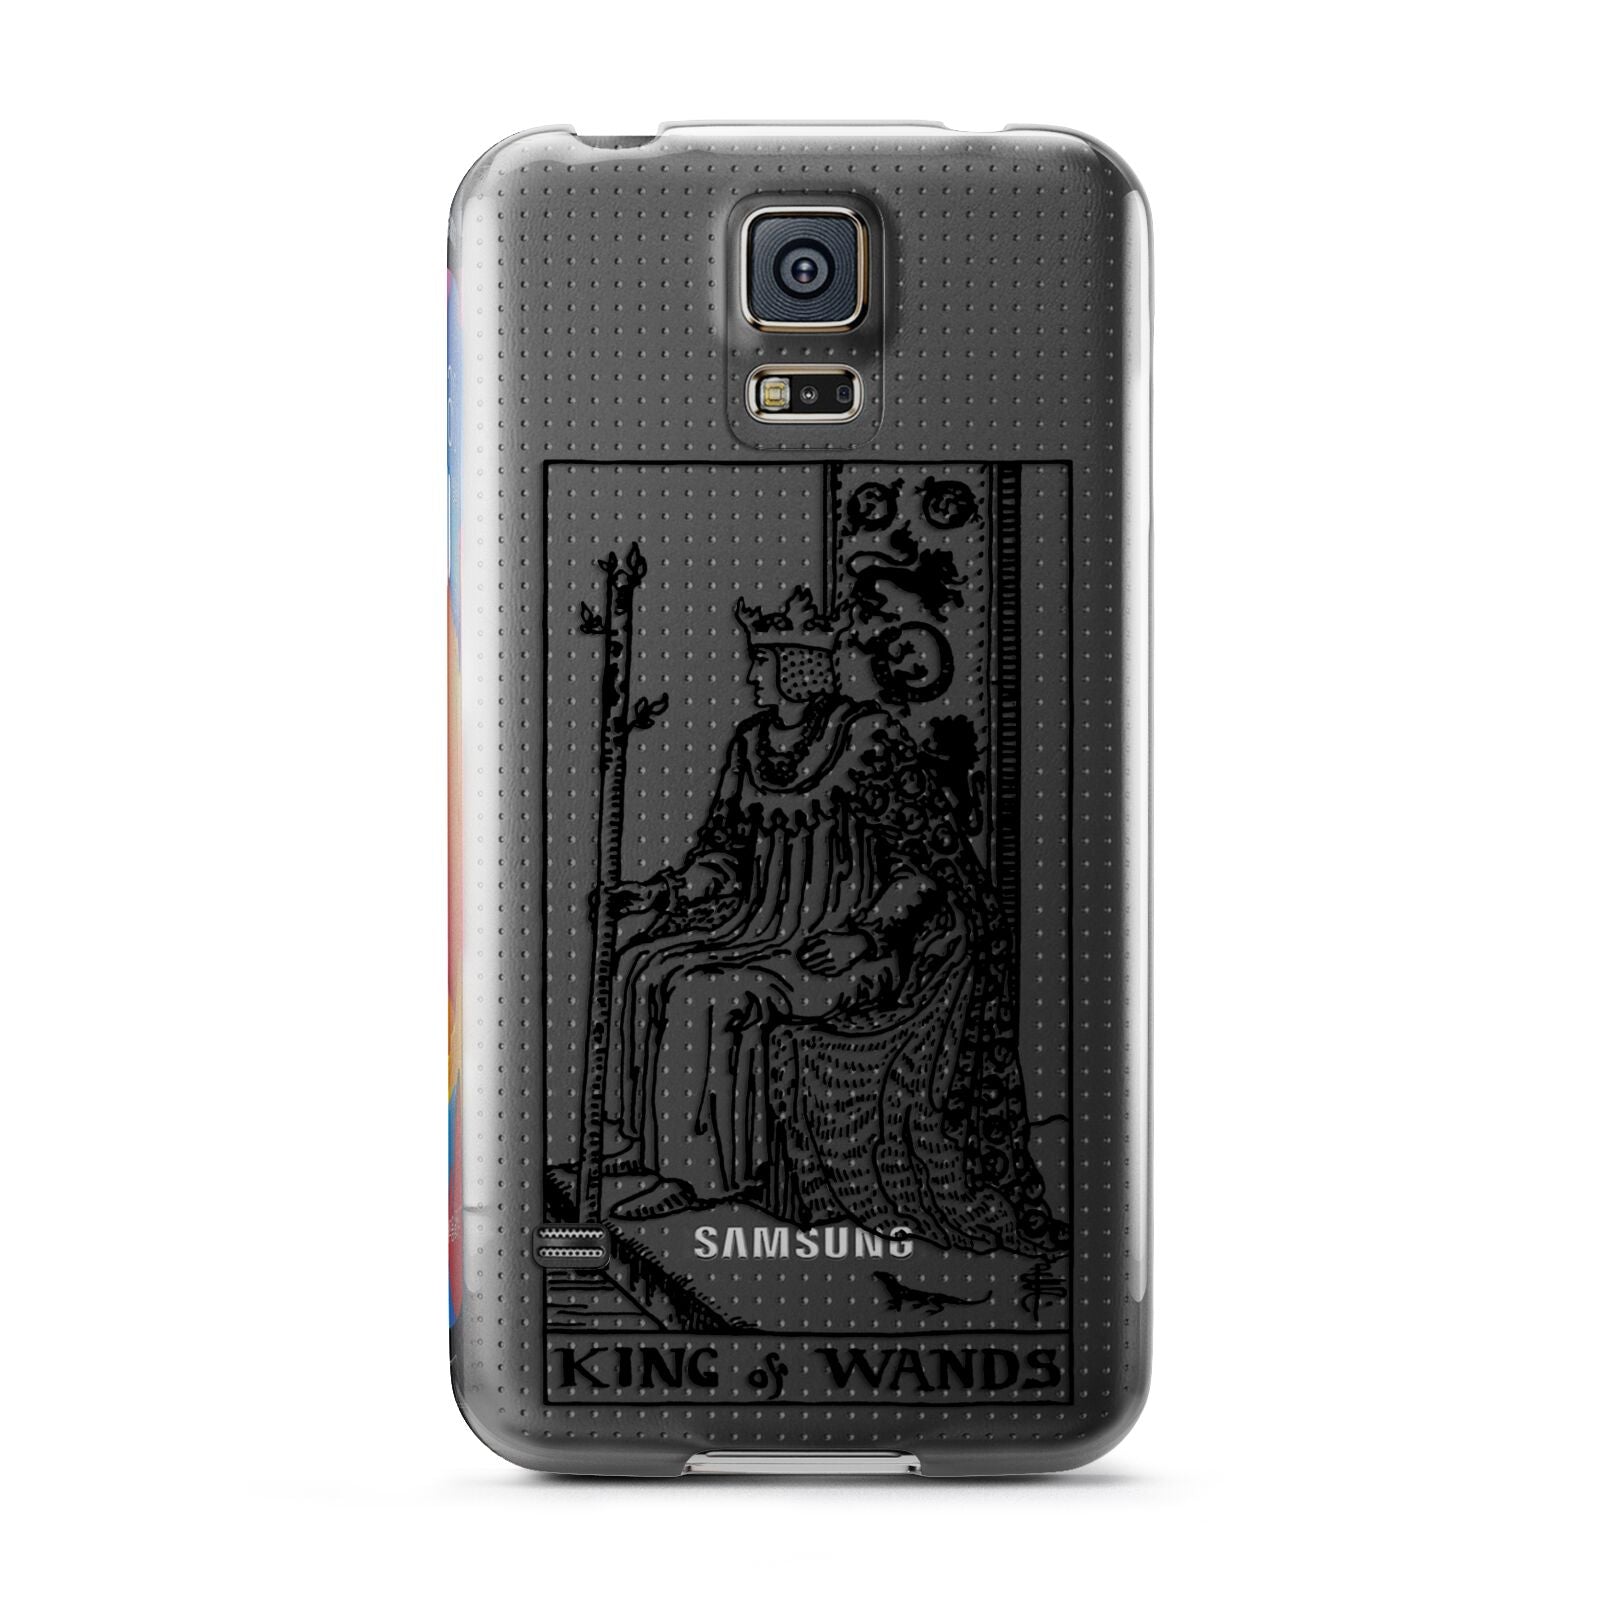 King of Wands Monochrome Samsung Galaxy S5 Case